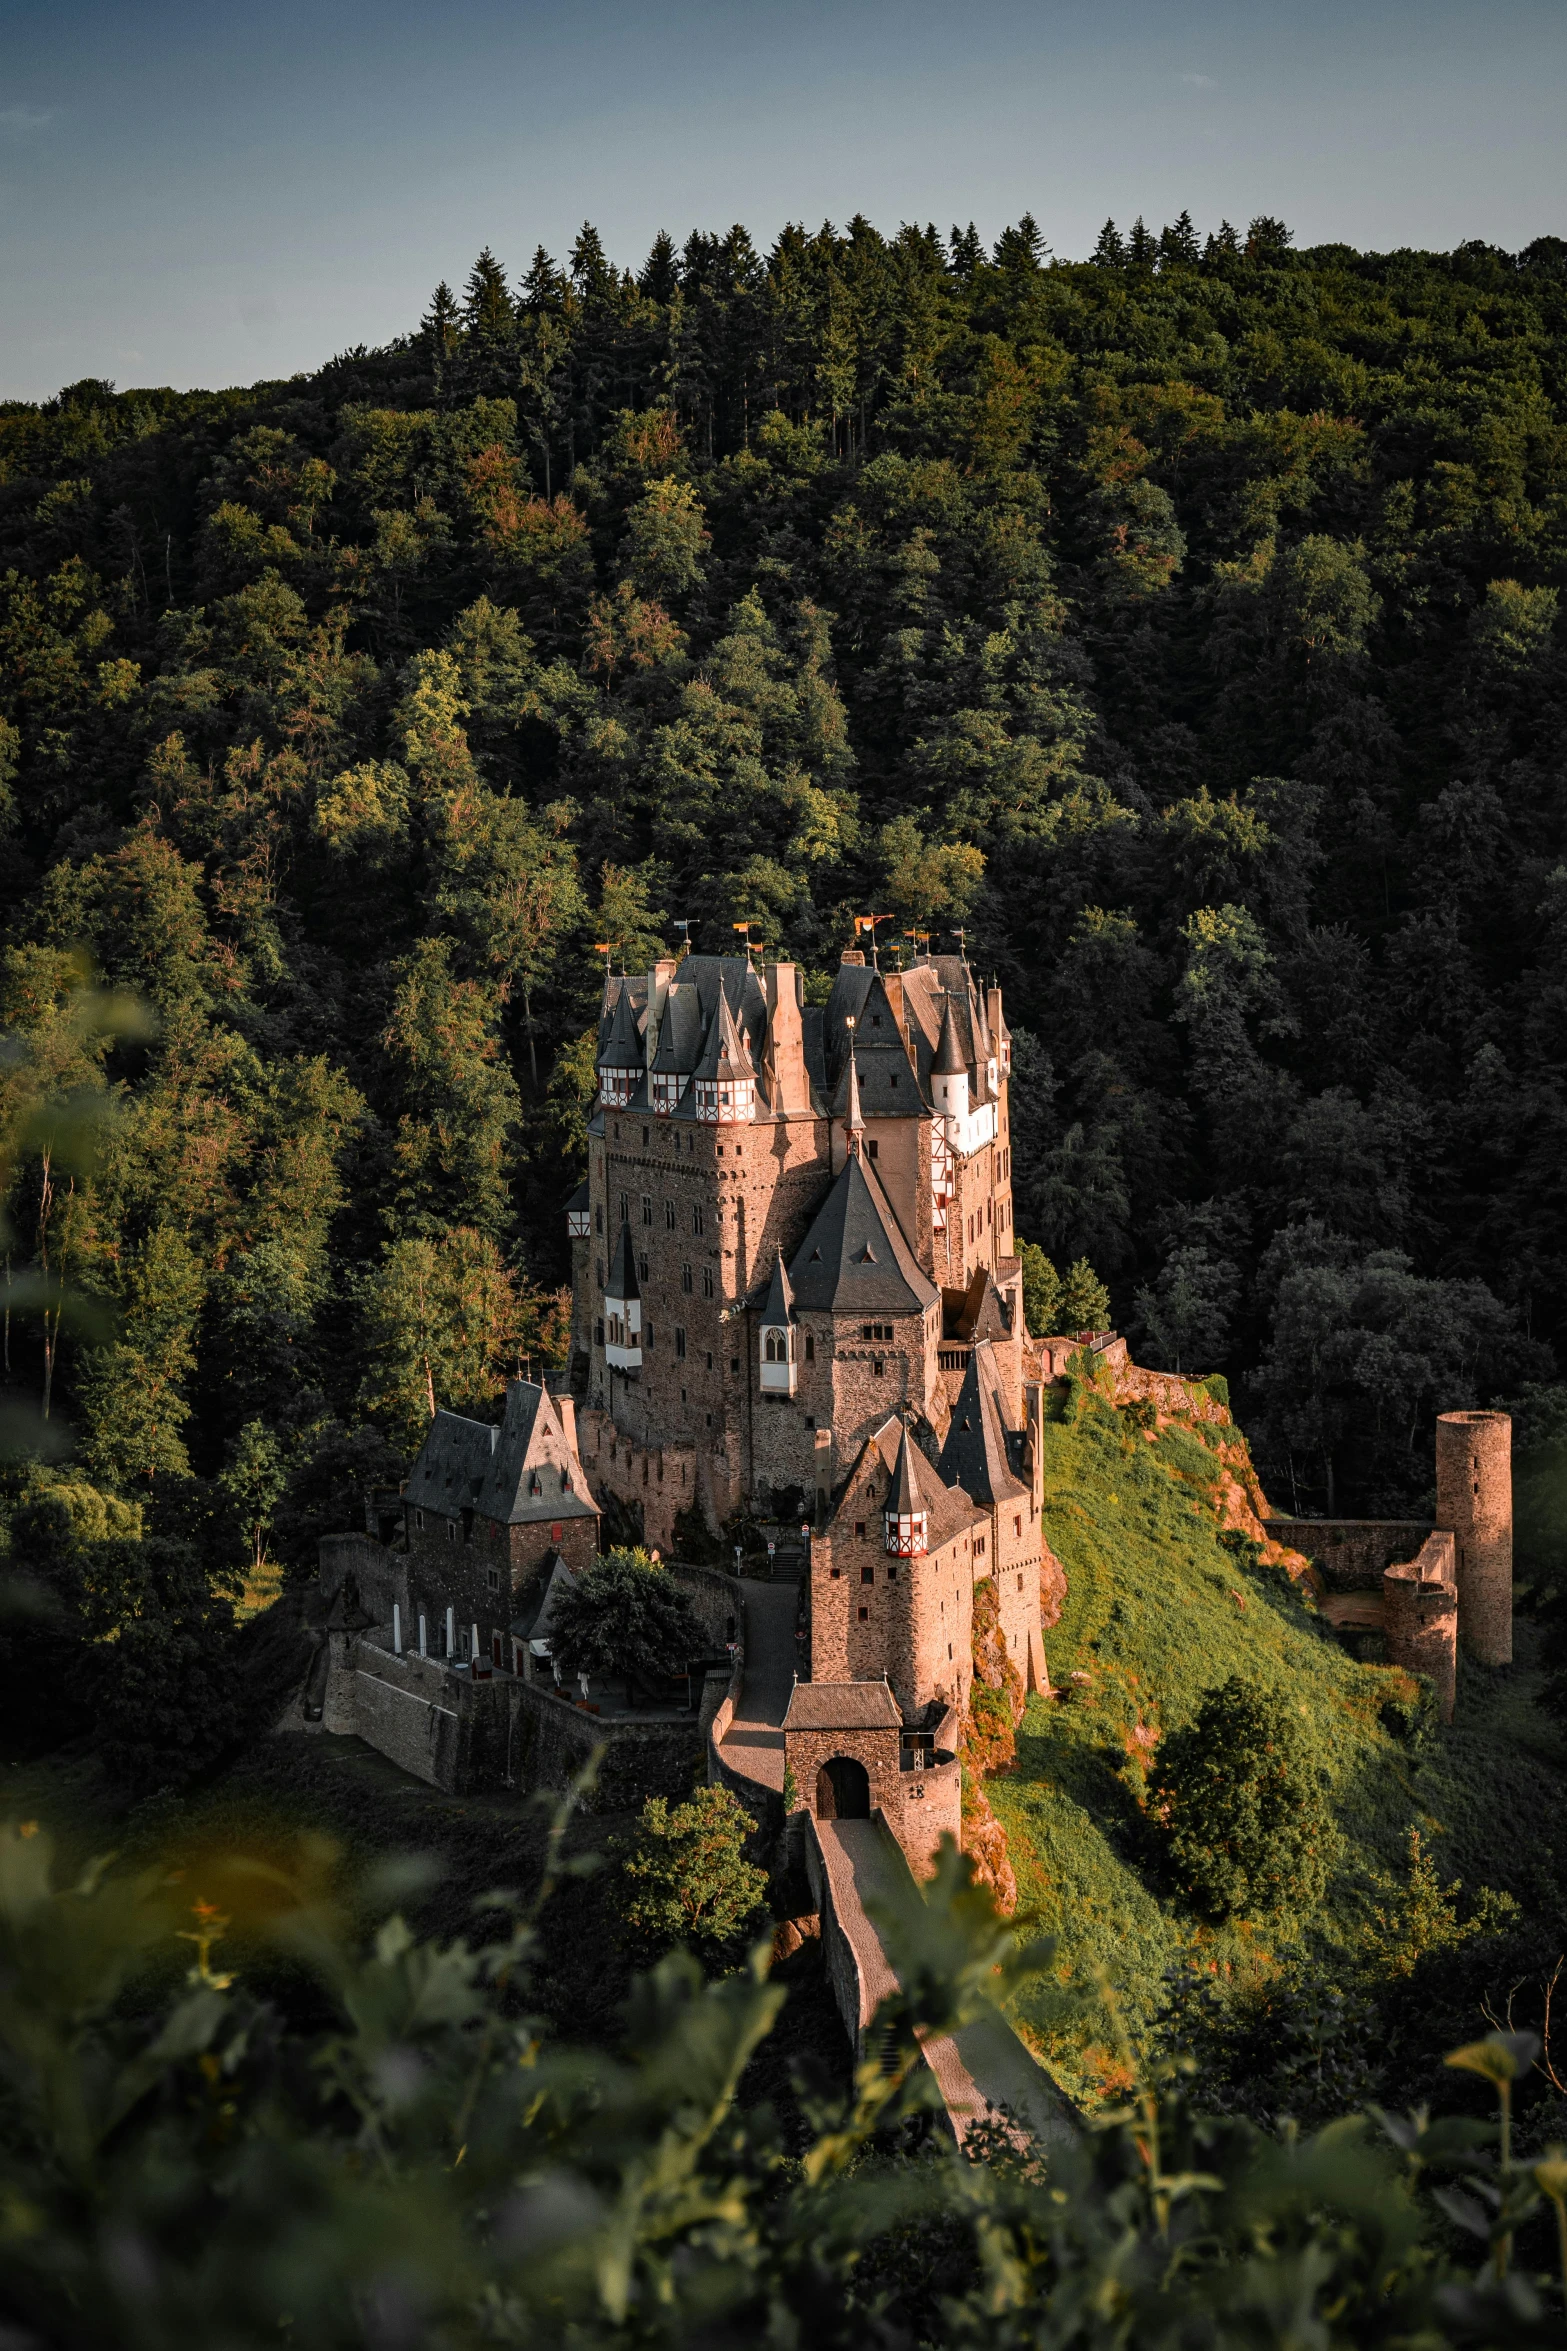 an old castle surrounded by trees and hills